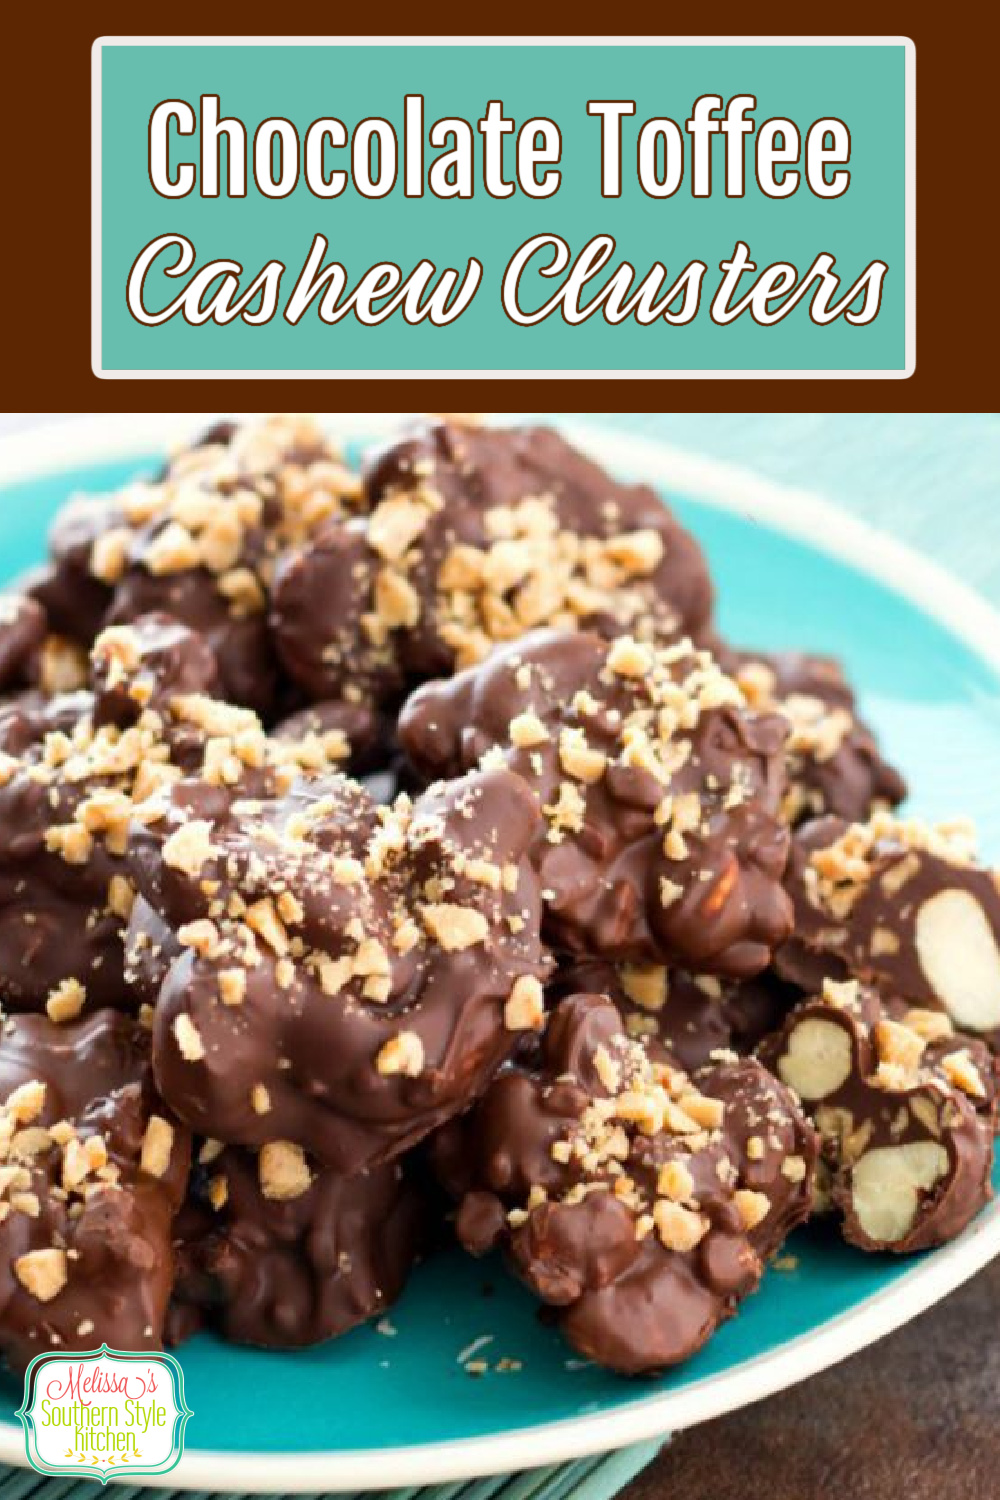 These insanely delicious Chocolate Toffee Cashew Clusters are addictive #chocolatecashewclusters #chocolatecandy #cashewclusters #toffee #chocolatetoffee #easyrecipes #candy ##christmascandy #chocolate #cashews #holidayrecipes #southernrecipes #southernfood